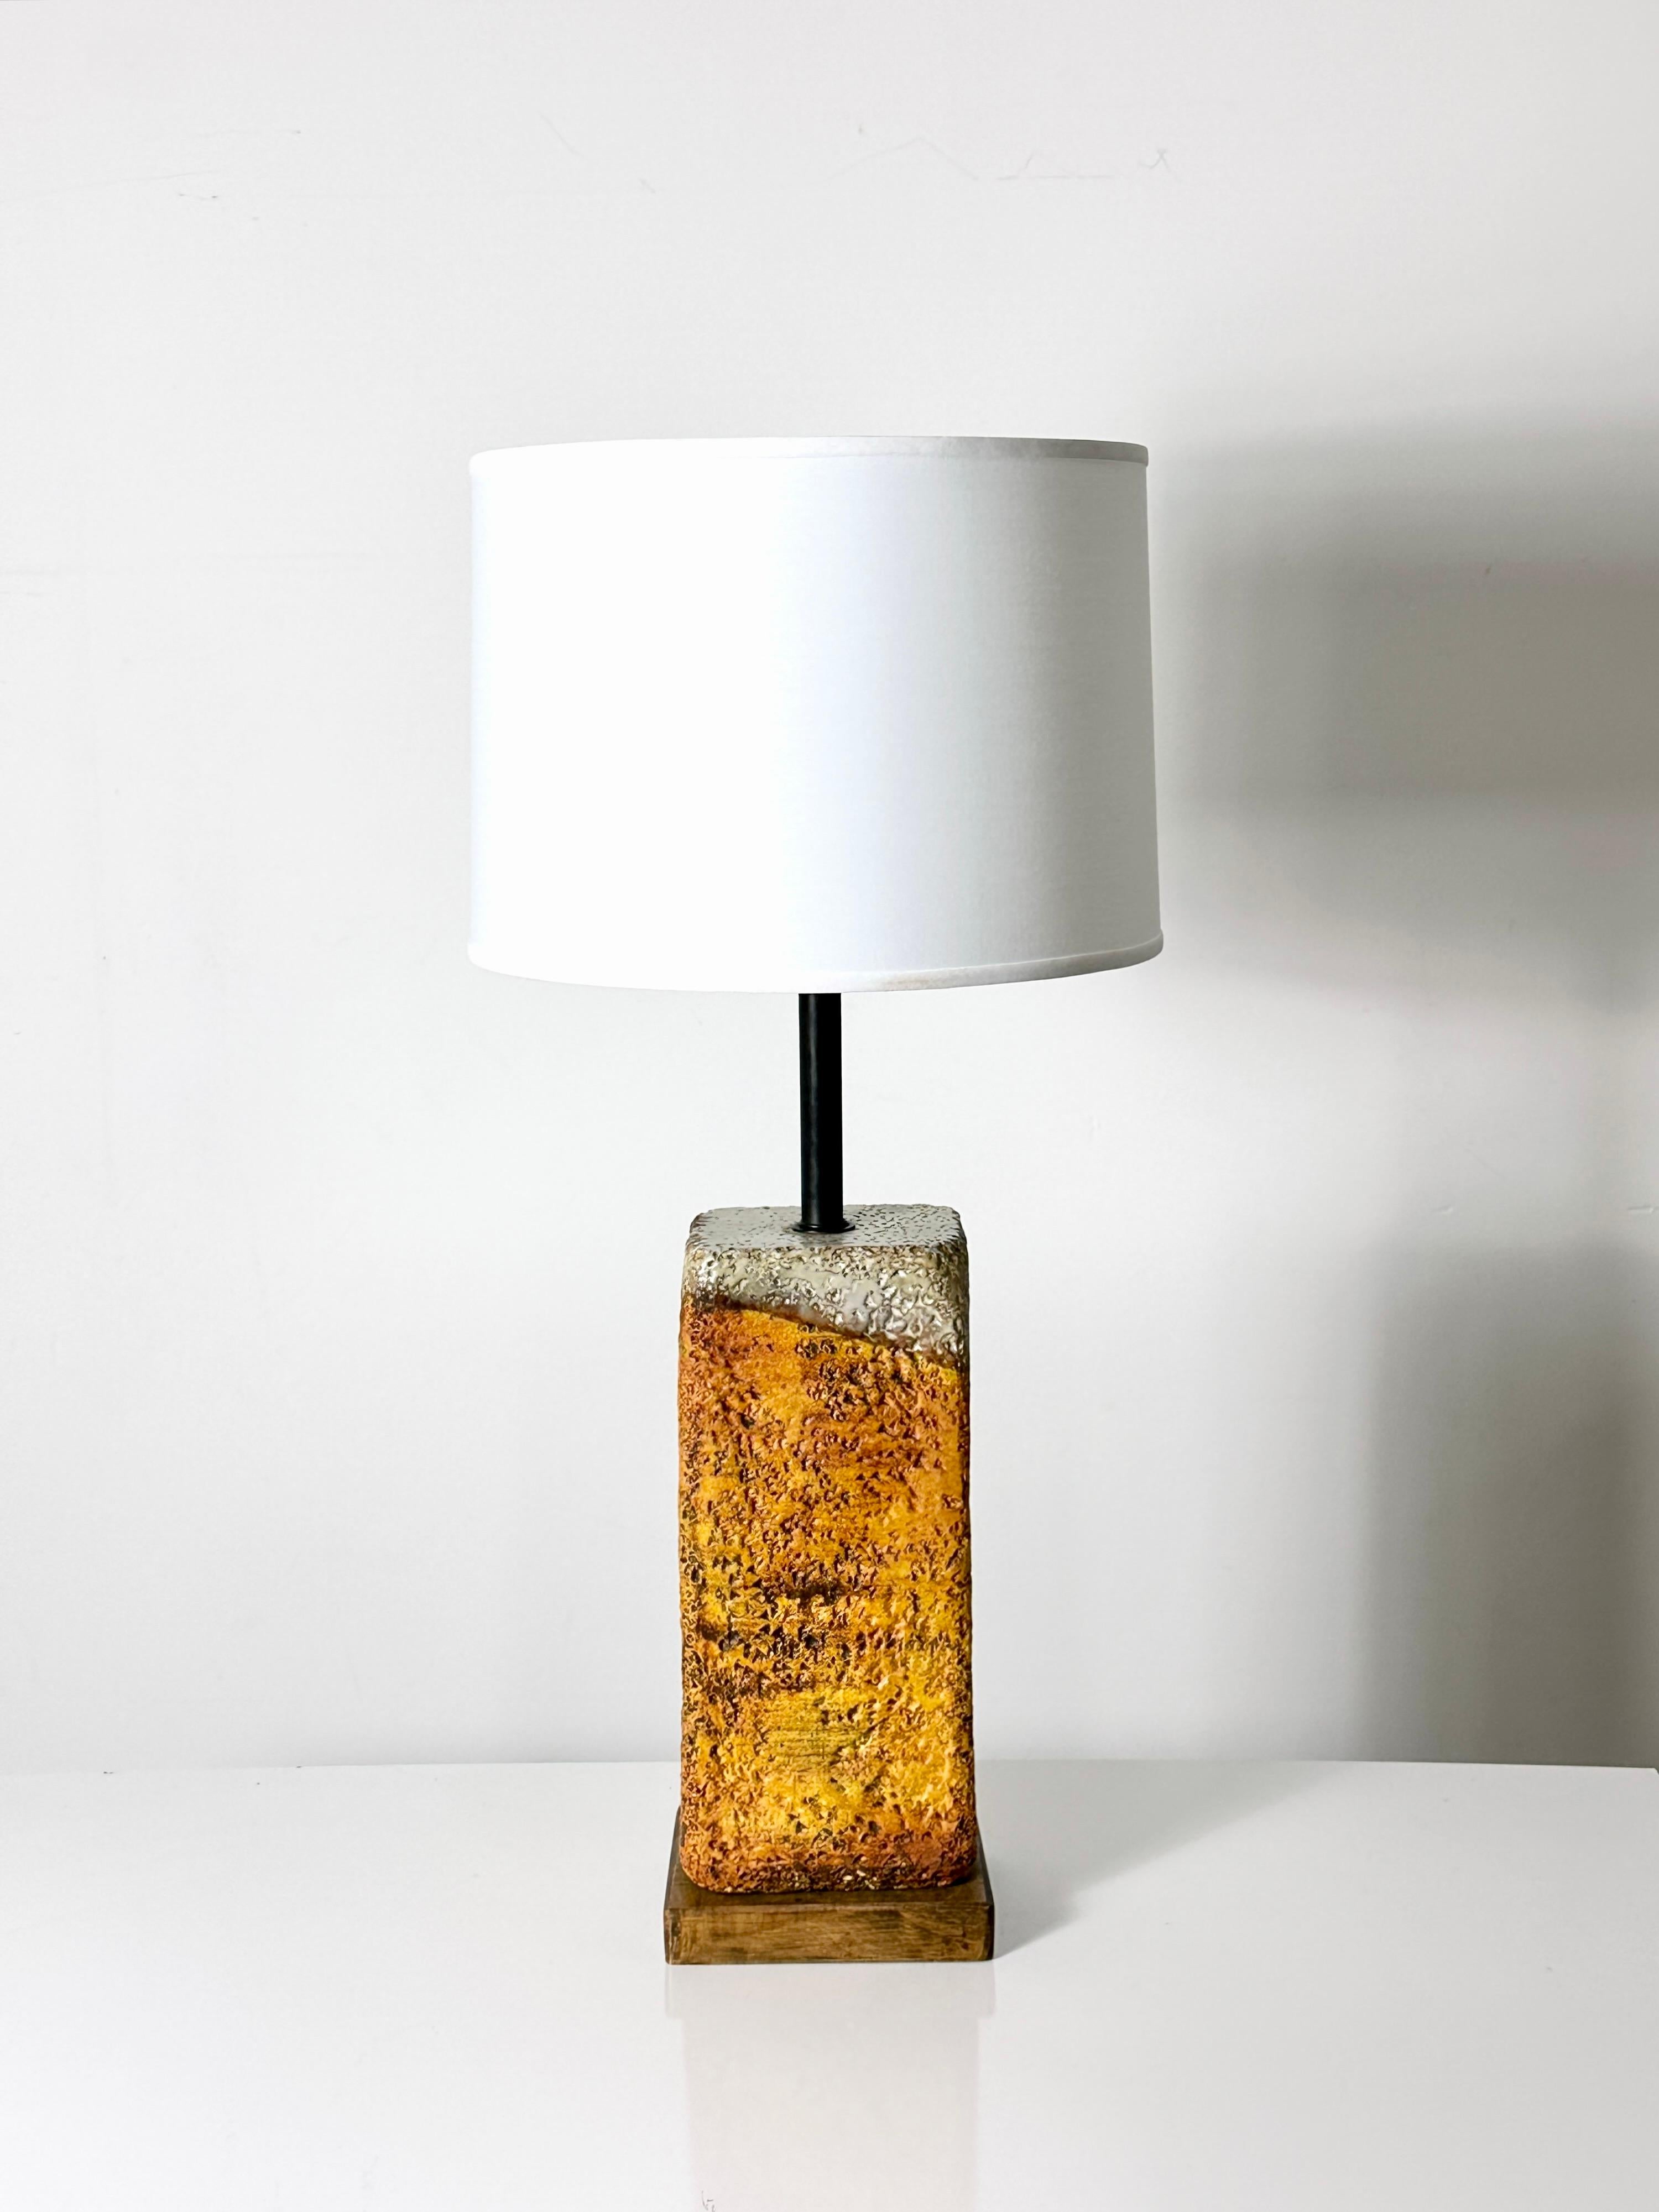 Lava glaze ceramic table lamp designed by Marcello Fantoni for Raymor circa 1950s
Textured base in muted orange and brown glazes
Mounted to original wood base
Three way socket
Shade is for display purposes and not included